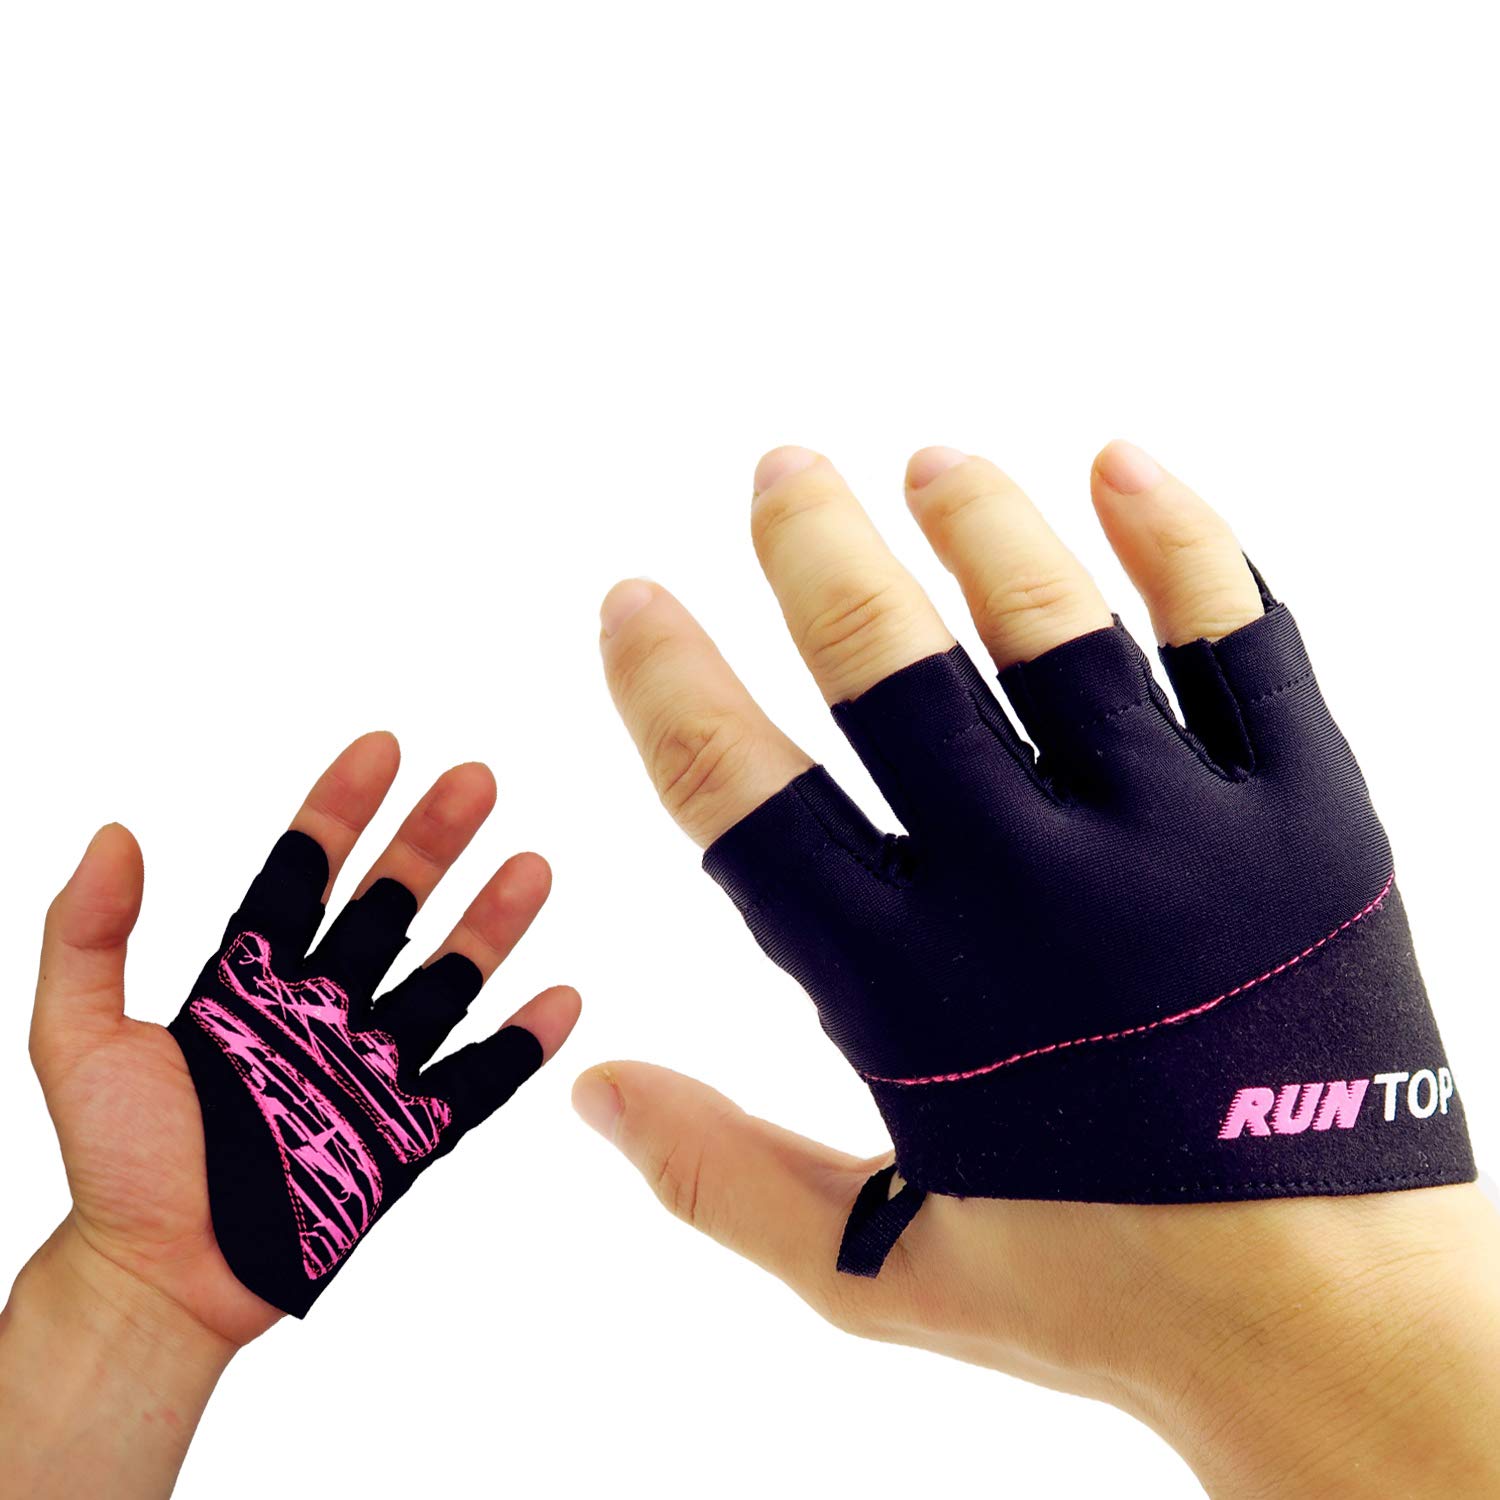 RUNTOP Workout gloves Weight Lifting grips with Silicon Padding by RUNTOP - Exercise gloves Perfect for Women Men cross Training WODS W